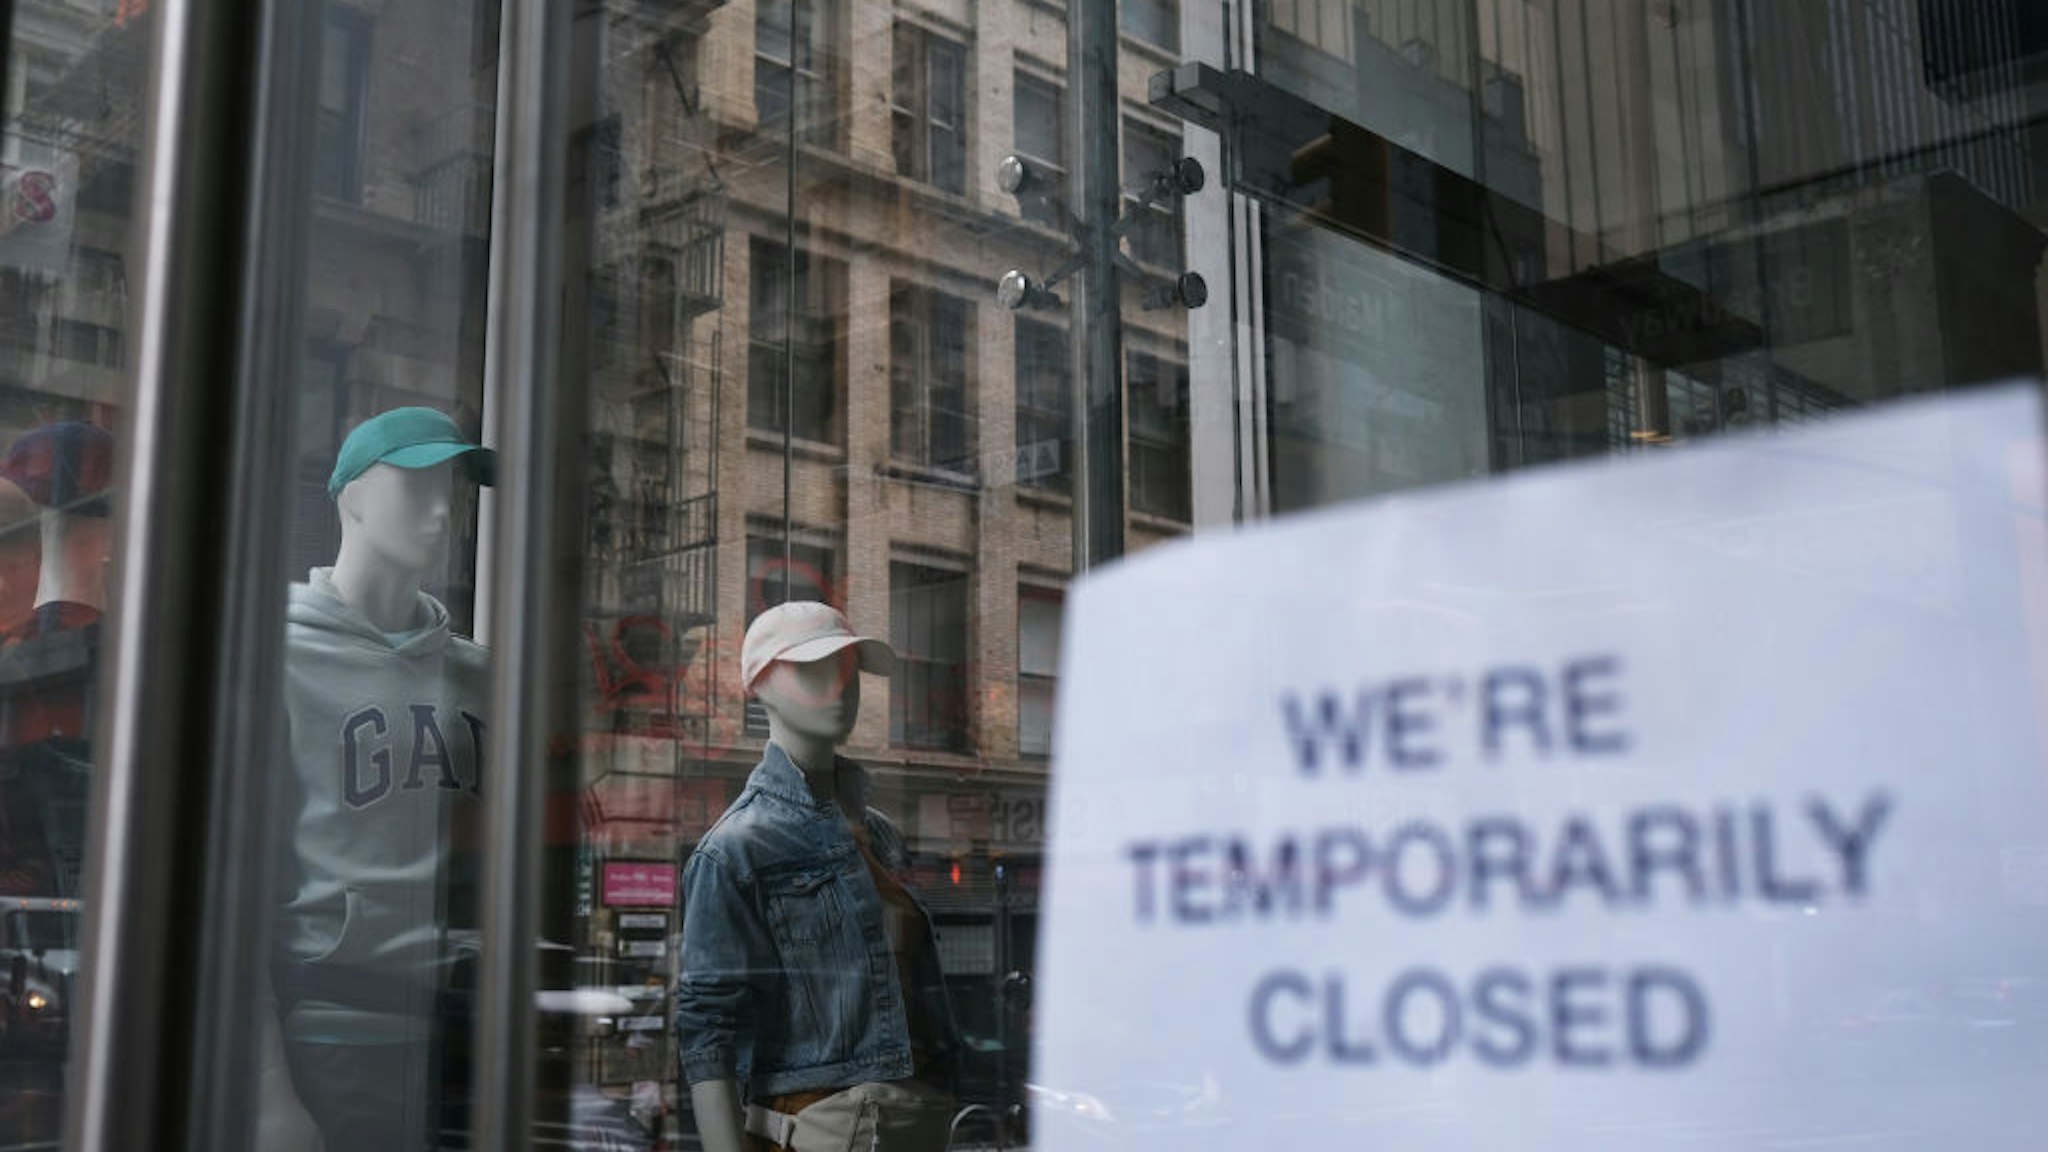 NEW YORK, NY - MAY 08: A store stands closed near Wall Street as the coronavirus keeps financial markets and businesses mostly closed on May 08, 2020 in New York City. The Bureau of Labor Statistics announced on Friday that the US economy lost 20.5 million jobs in April. This is the largest decline in jobs since the government began tracking the data in 1939. (Spencer Platt/Getty Images)